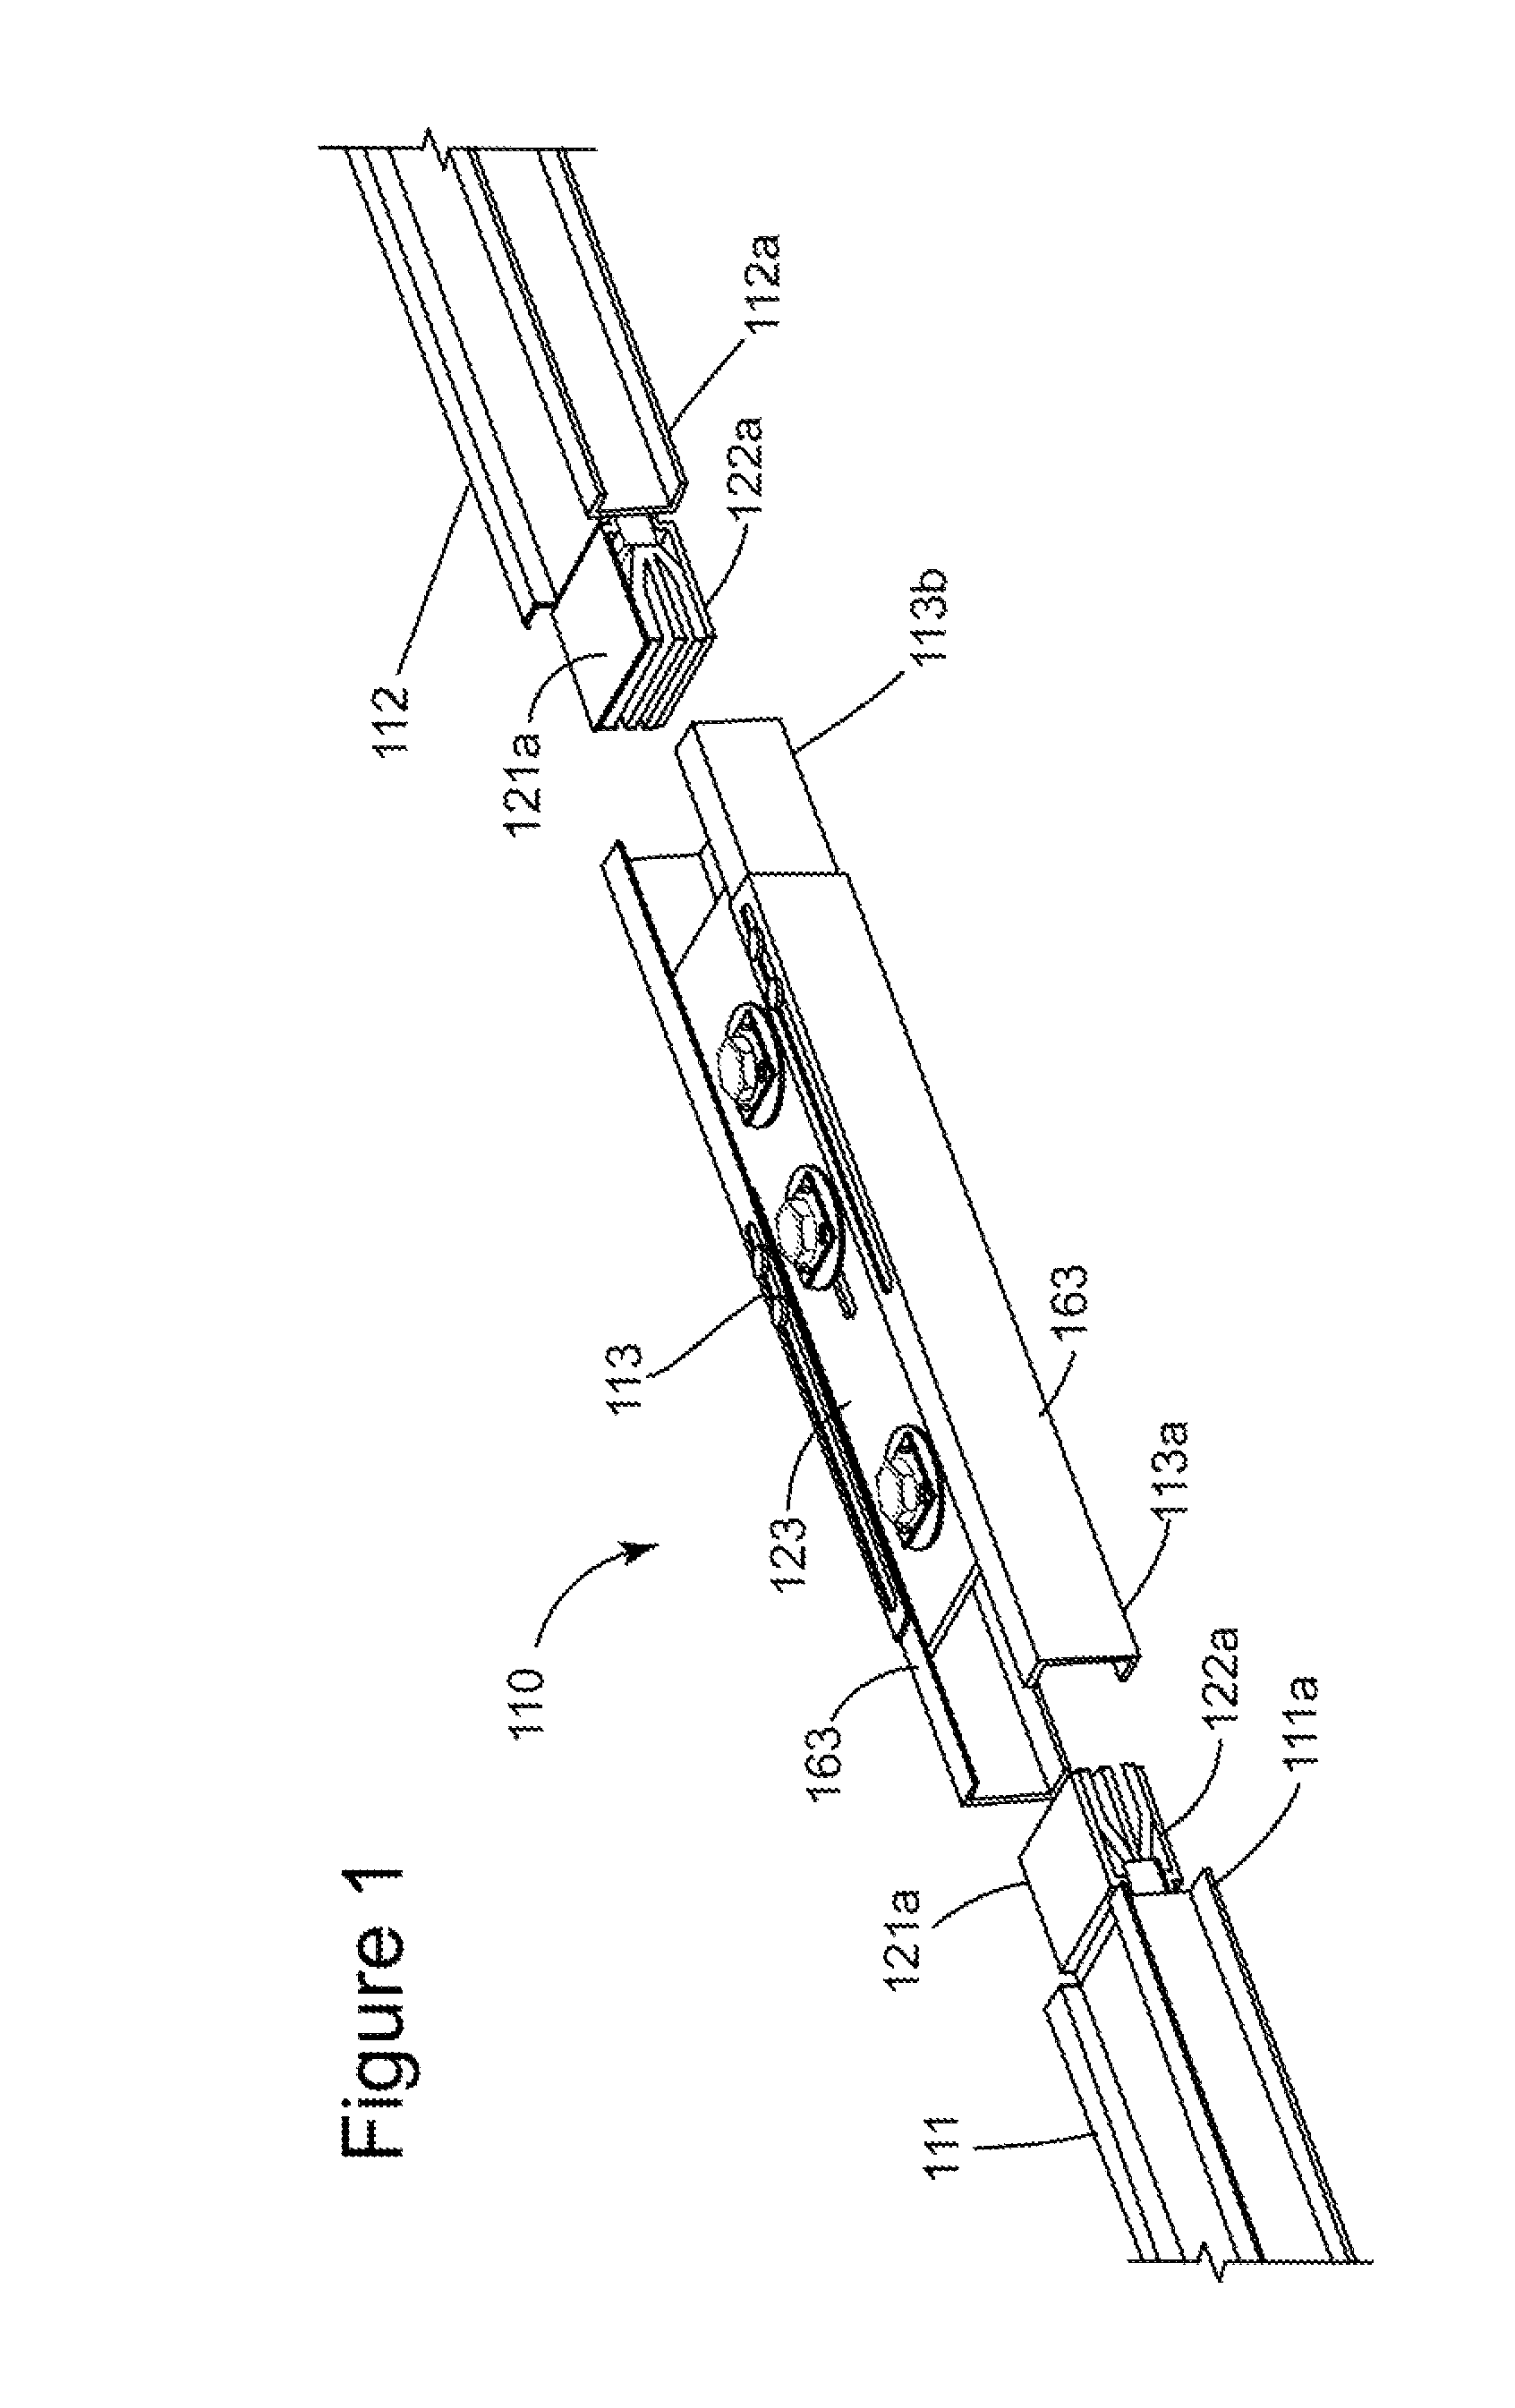 Adjustable electrical busway joint